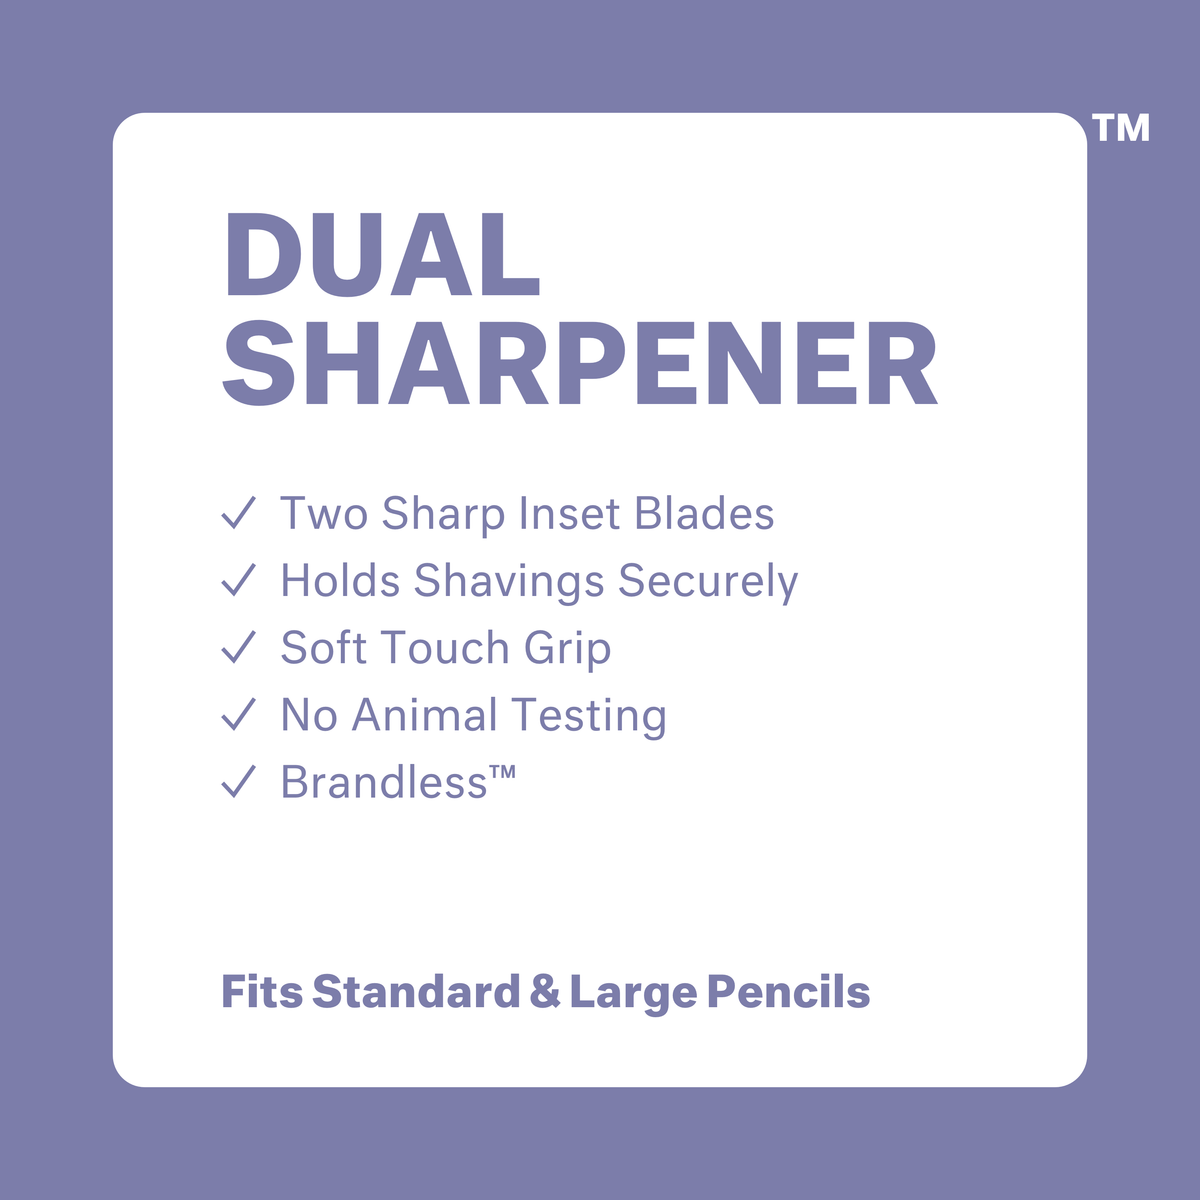 Dual Sharpener: two sharp inset blades, holds shavings securely, soft touch grip, no animal testing, brandless. Fits standard and large pencils.